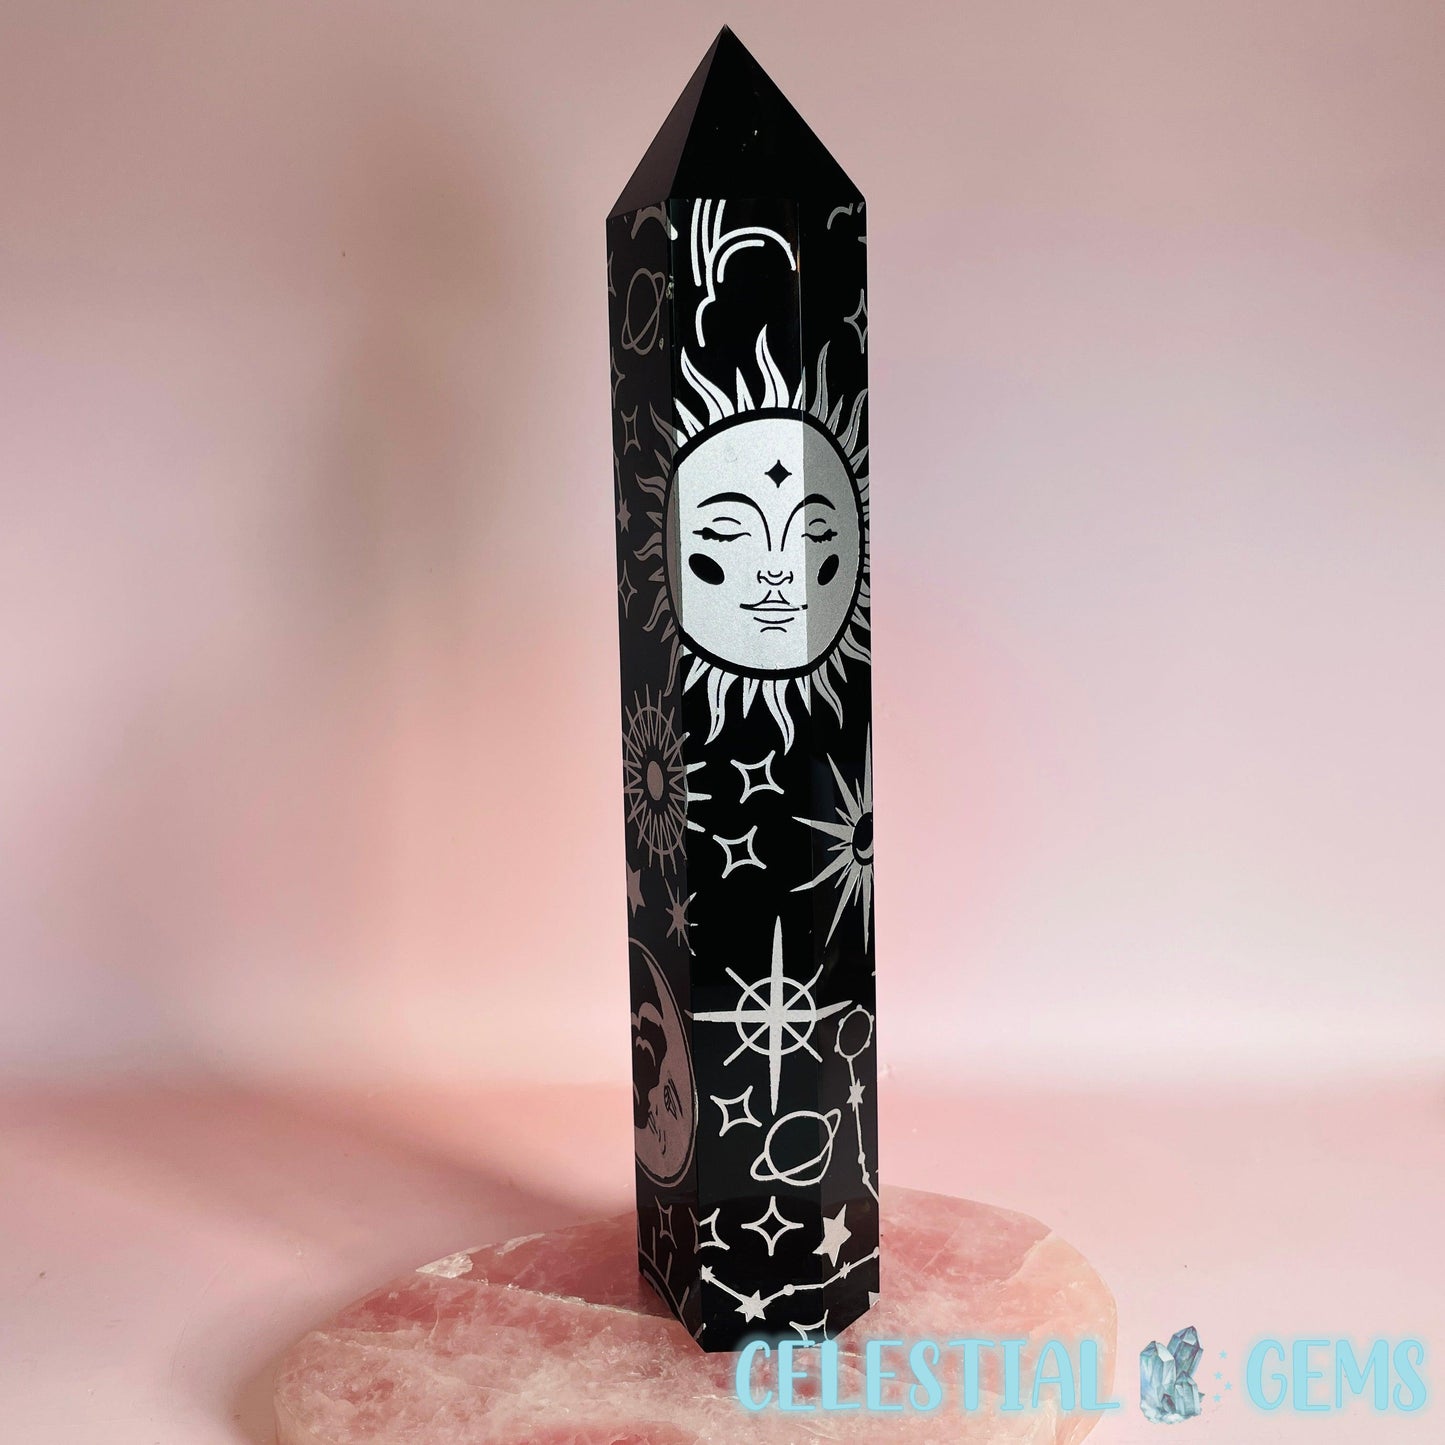 Obsidian Celestial Silver Etched XXL Tower